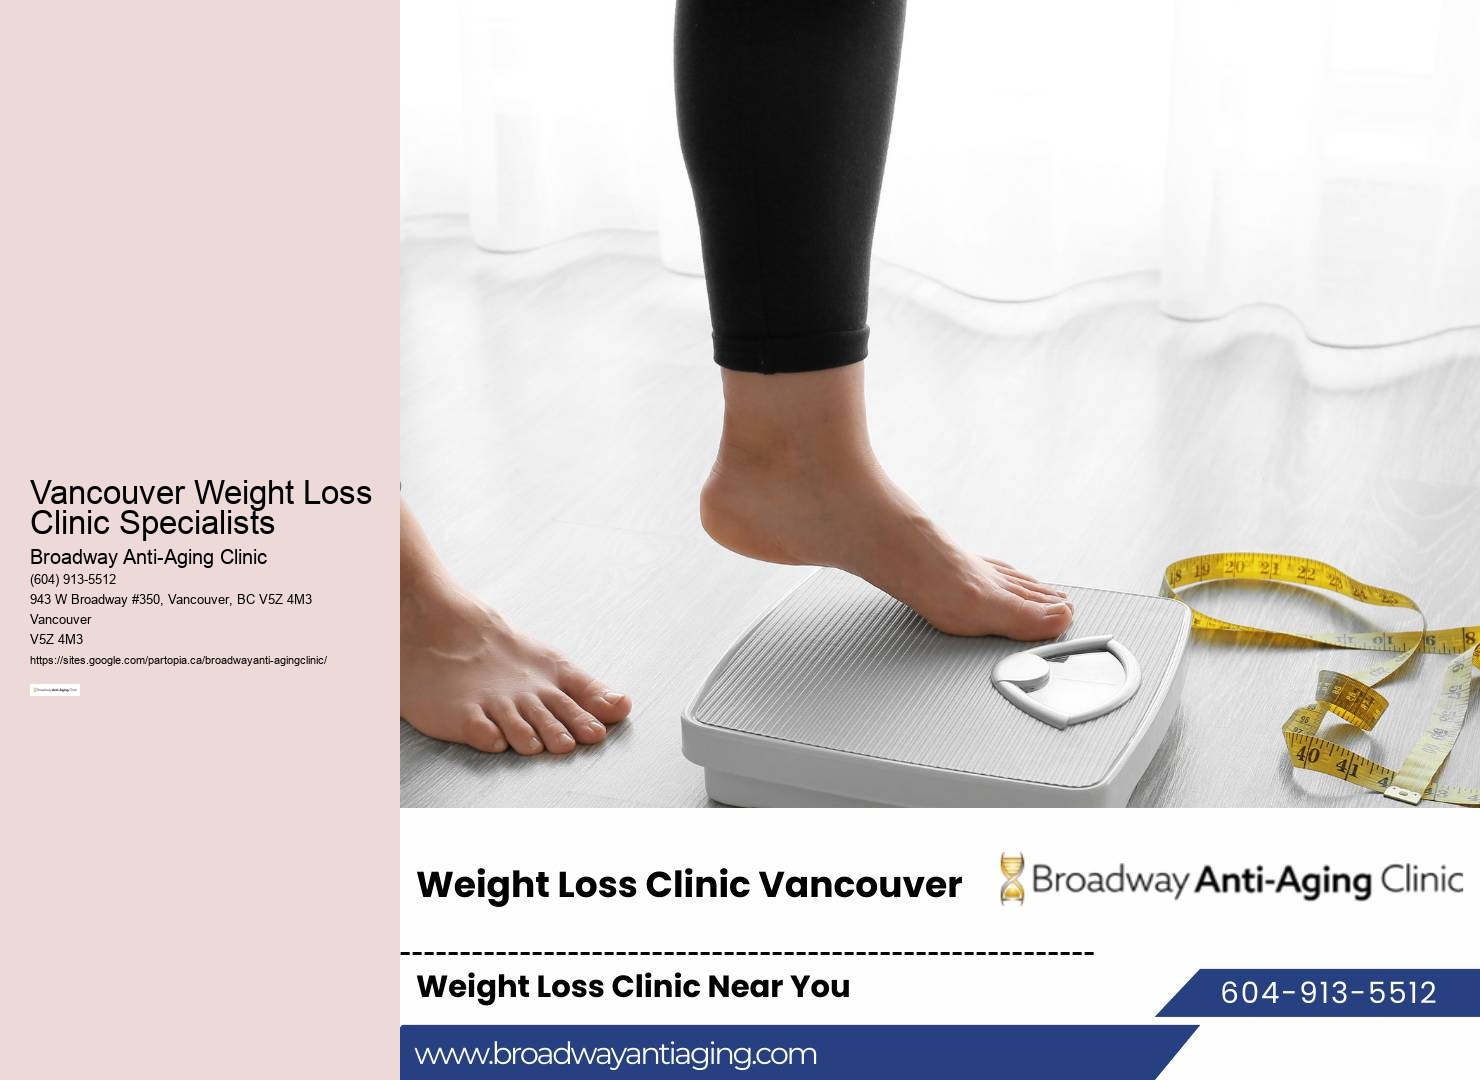 Medical weight management clinic Vancouver